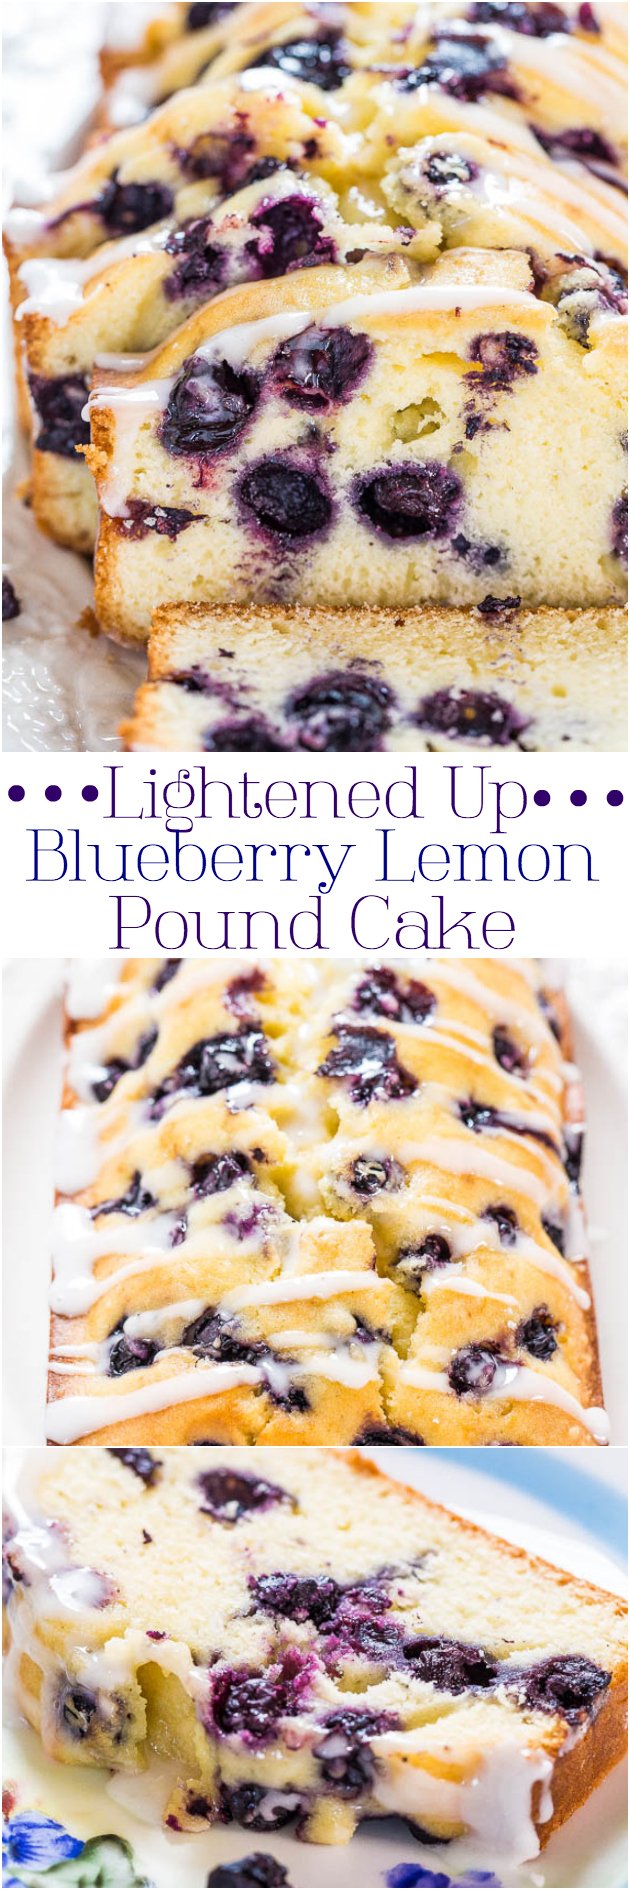 Healthier Lemon Blueberry Pound Cake — The blueberry-lemon combo is always a win, and so is pound cake that won’t break your caloric piggybank. This Lemon Blueberry Pound Cake is a keeper!